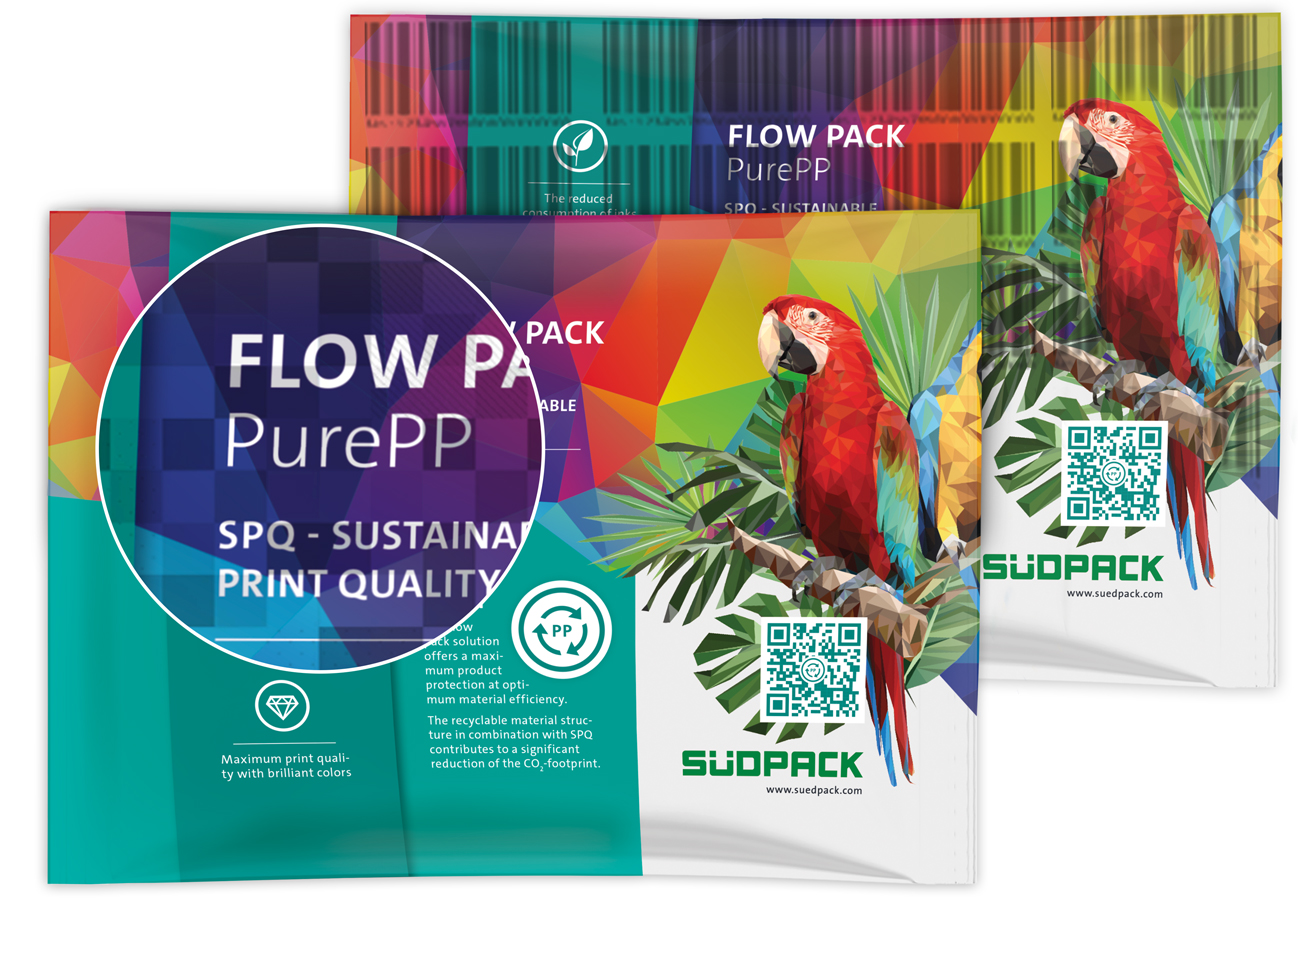 This image depicts a Flow Pack PurePP packaging by SÜDPACK printed with Digimarc Digital Watermark Codes.